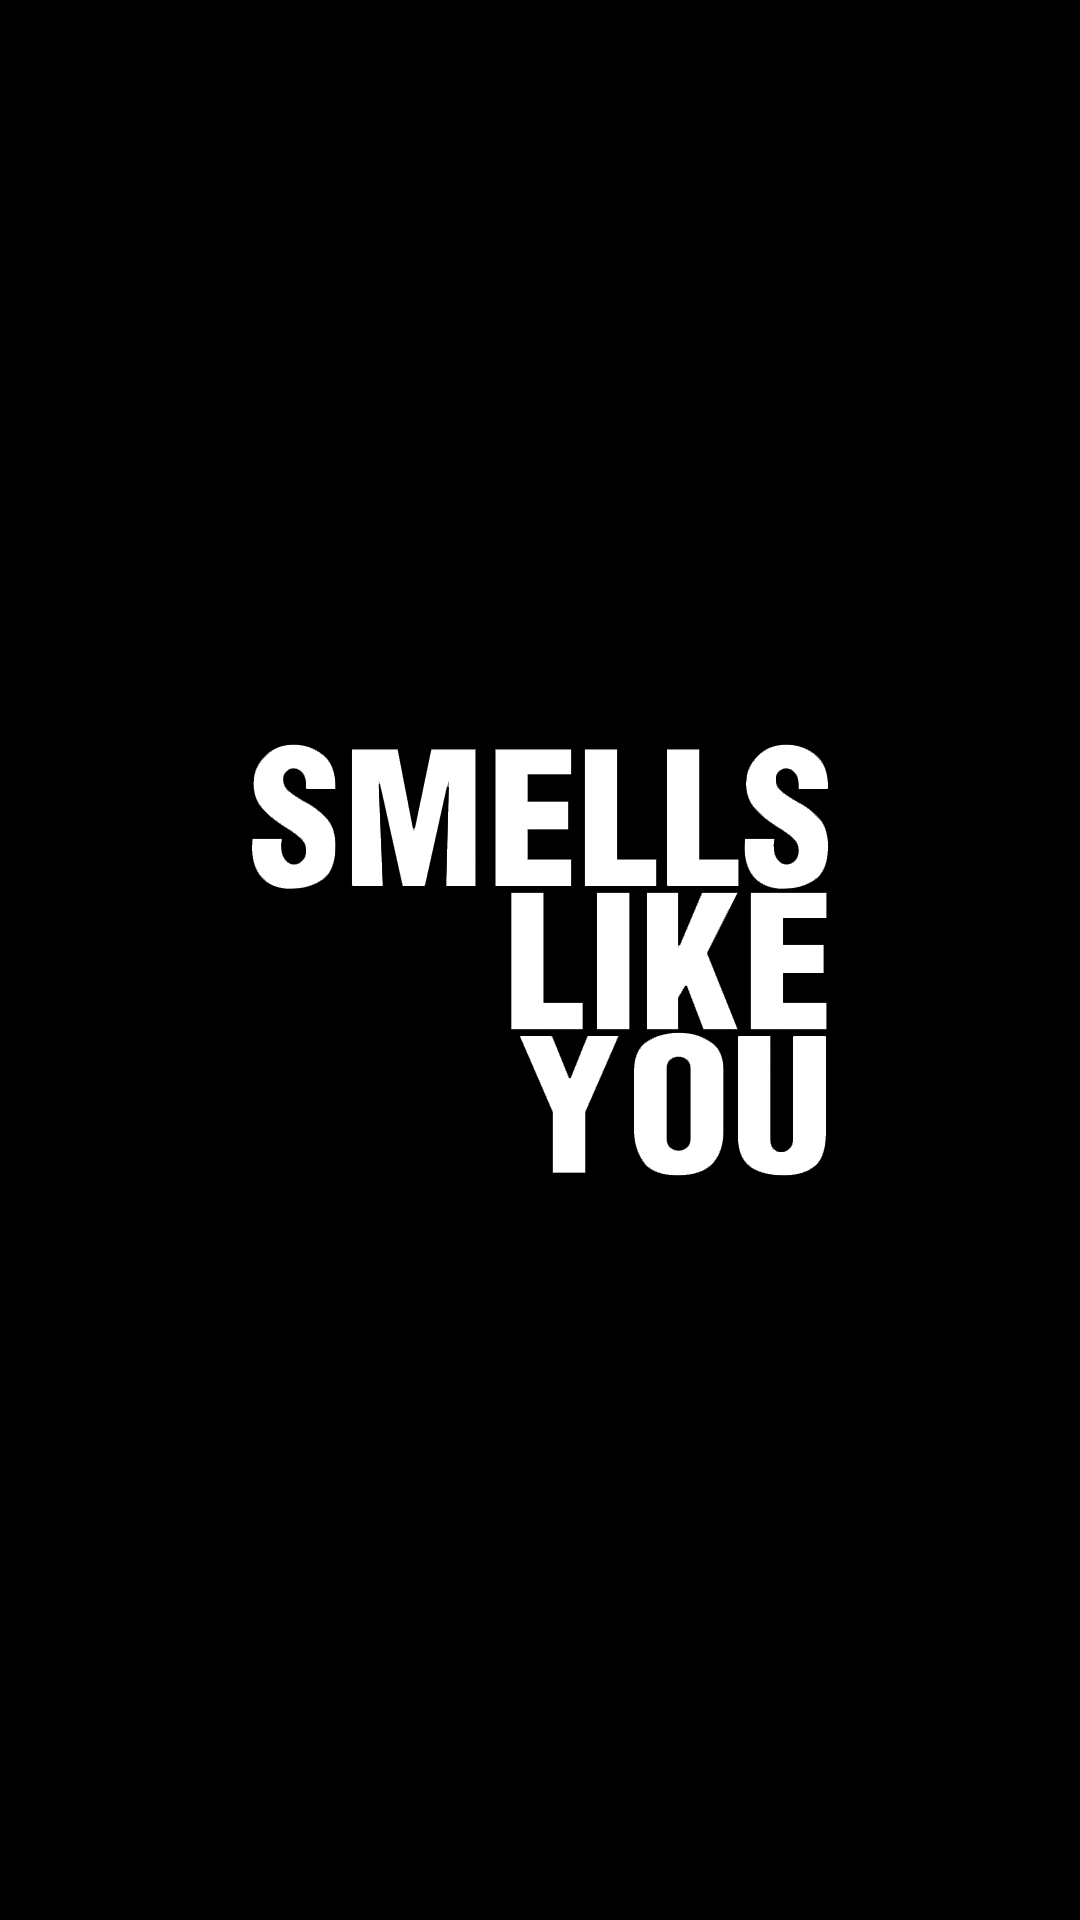 Smells like you. The campaign.